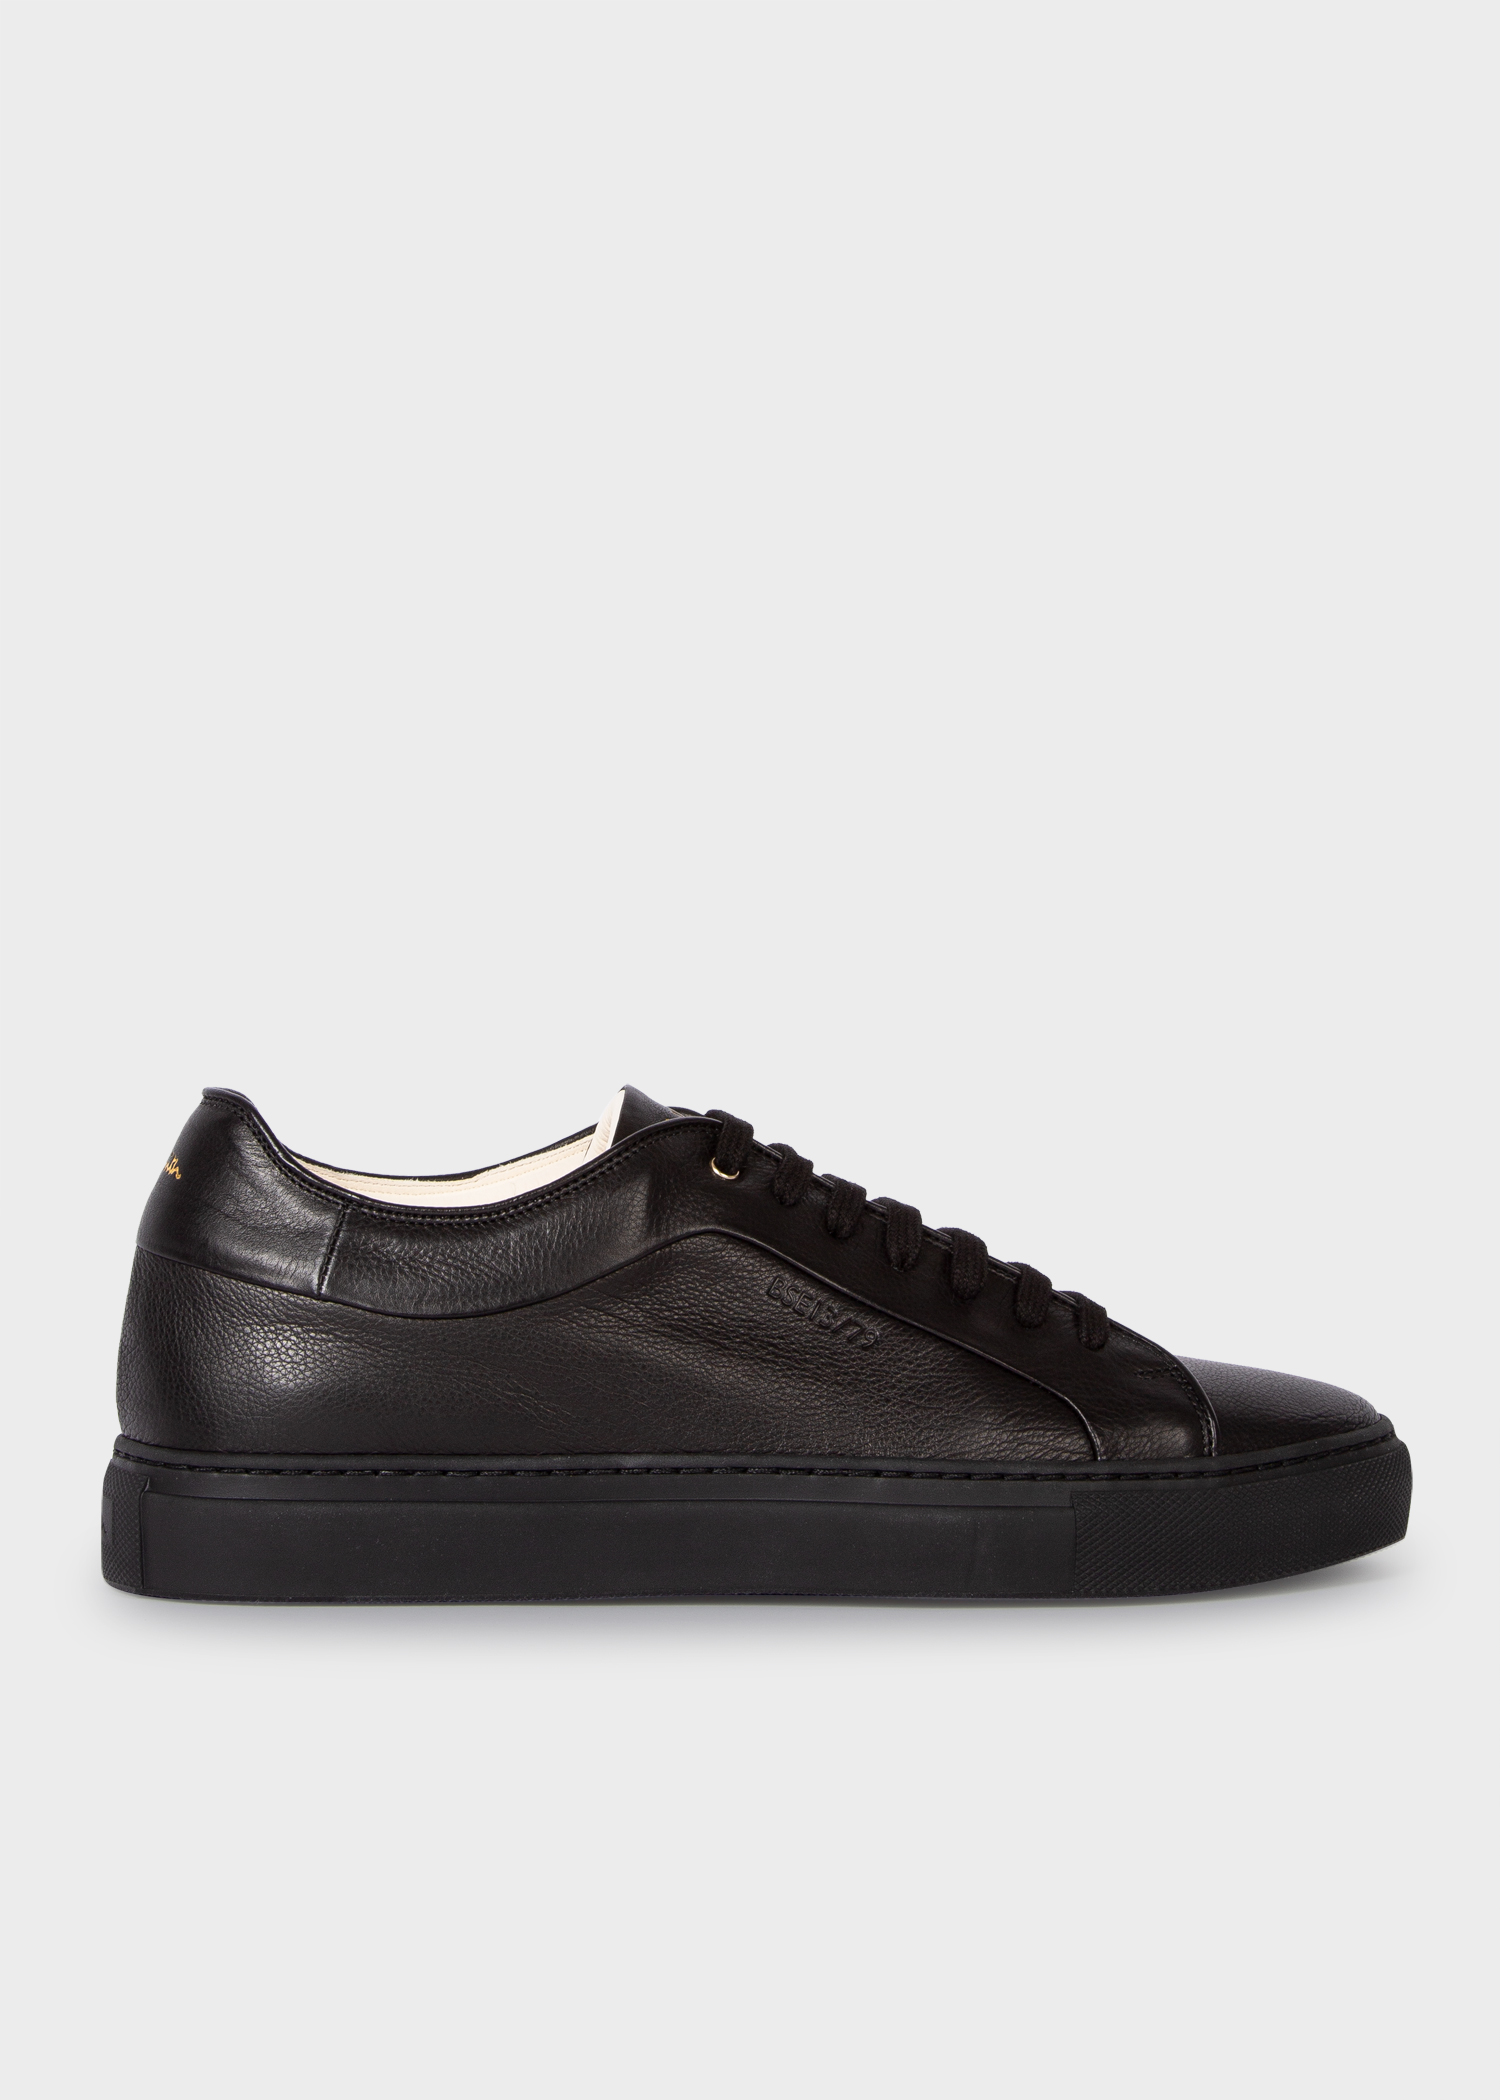 Men's Black Leather Eco 'Basso' Trainers